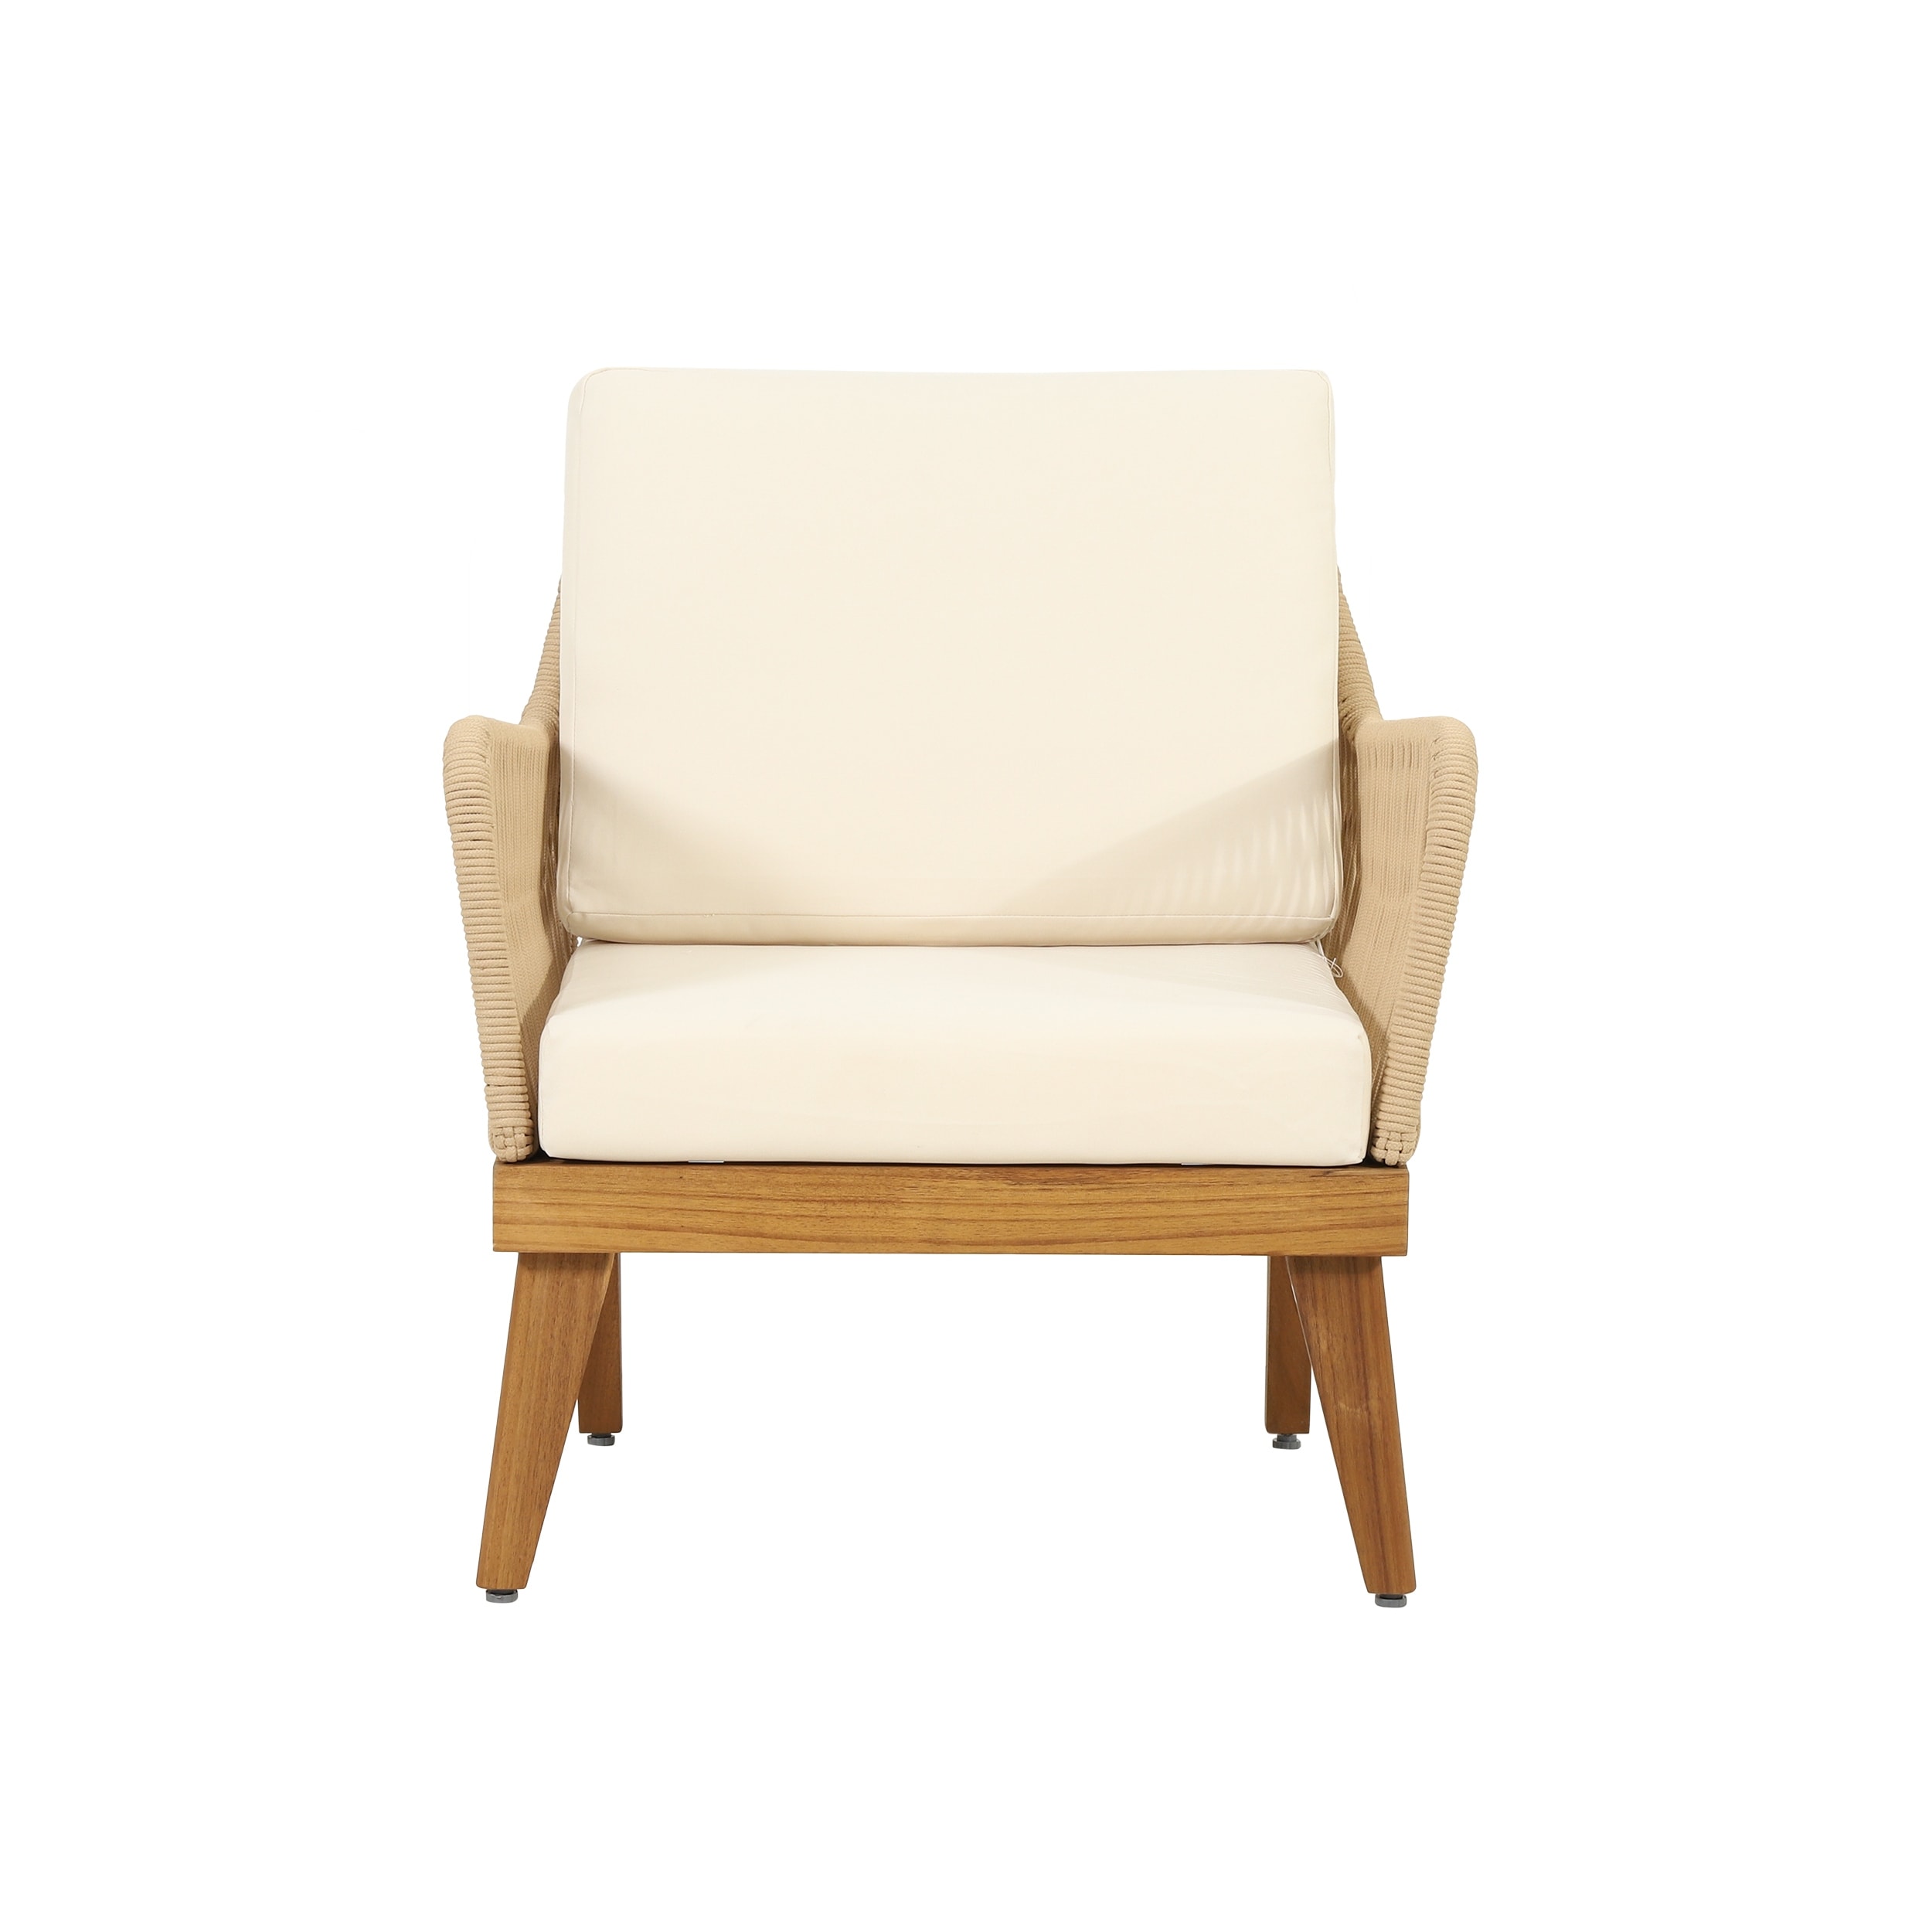 Annisa Acacia Wood And Rope Outdoor Club Chair With Cushions By Christopher Knight Home